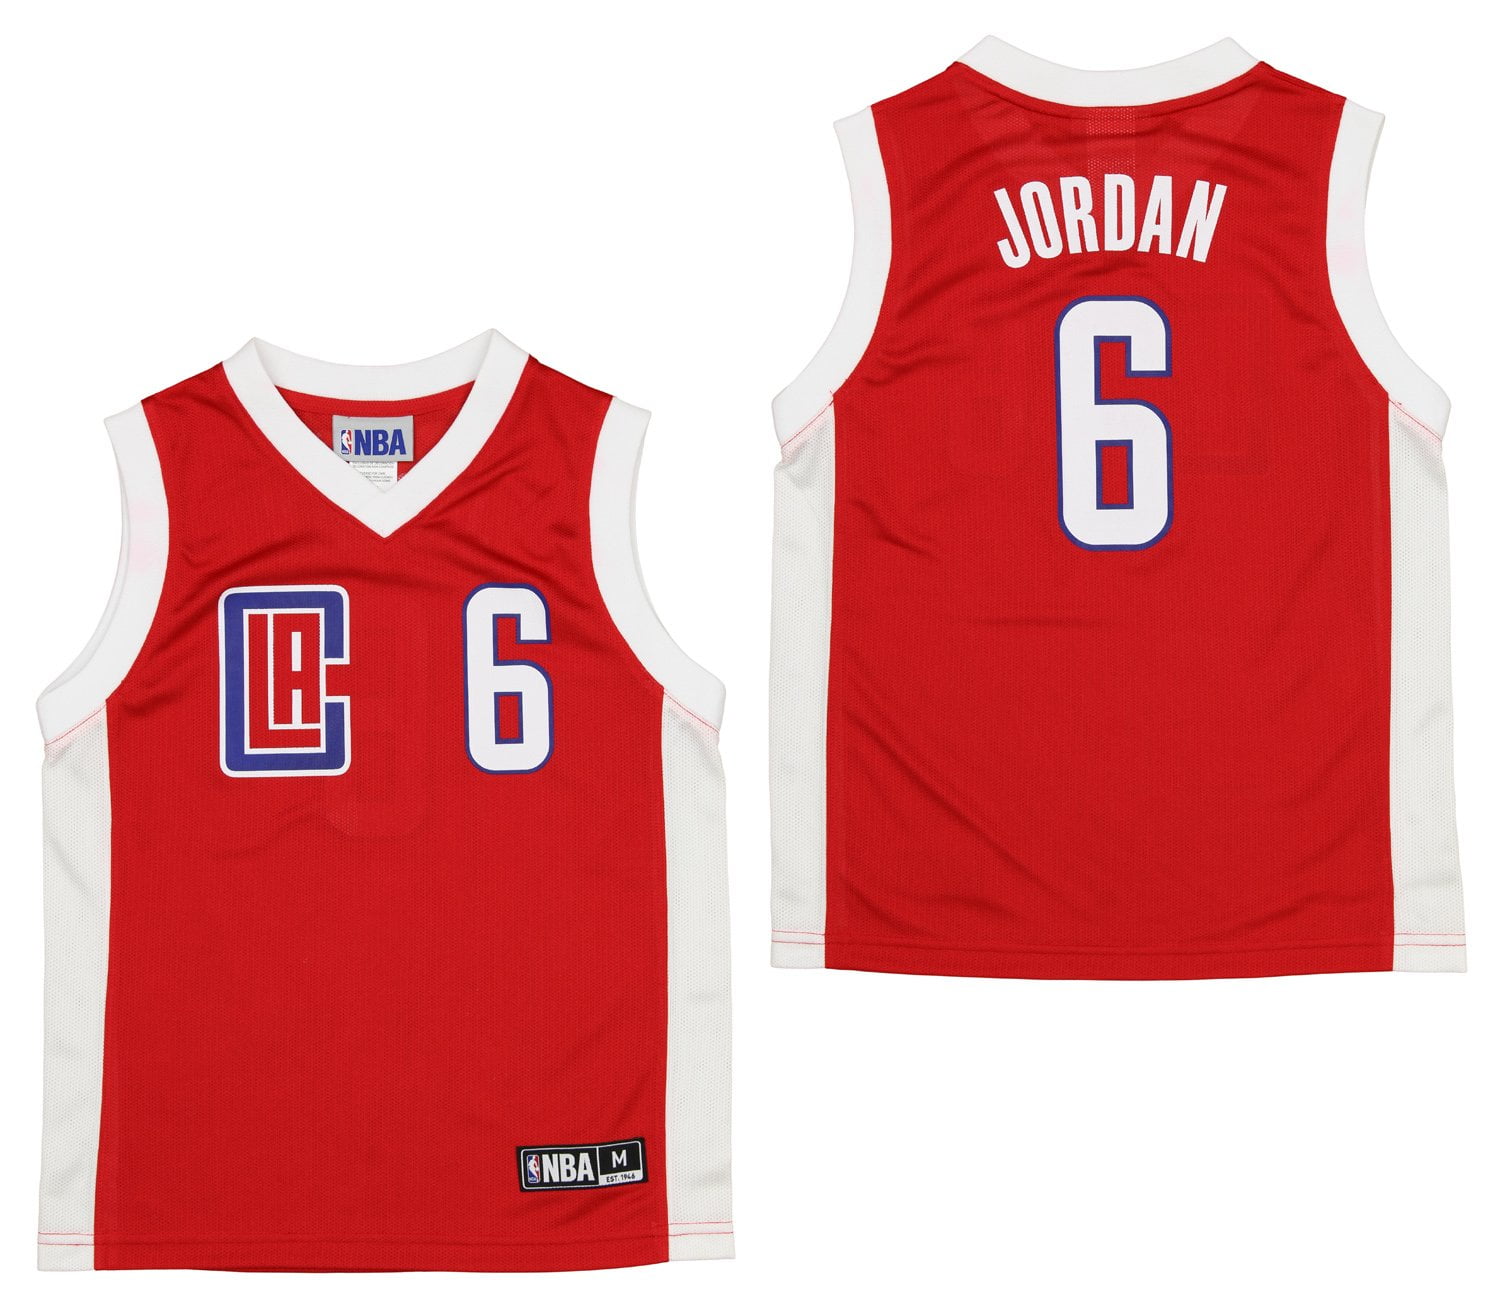 DeAndre Jordan Los Angeles Clippers #6 NBA Youth Road Jersey Red (Youth  Medium 10/12)